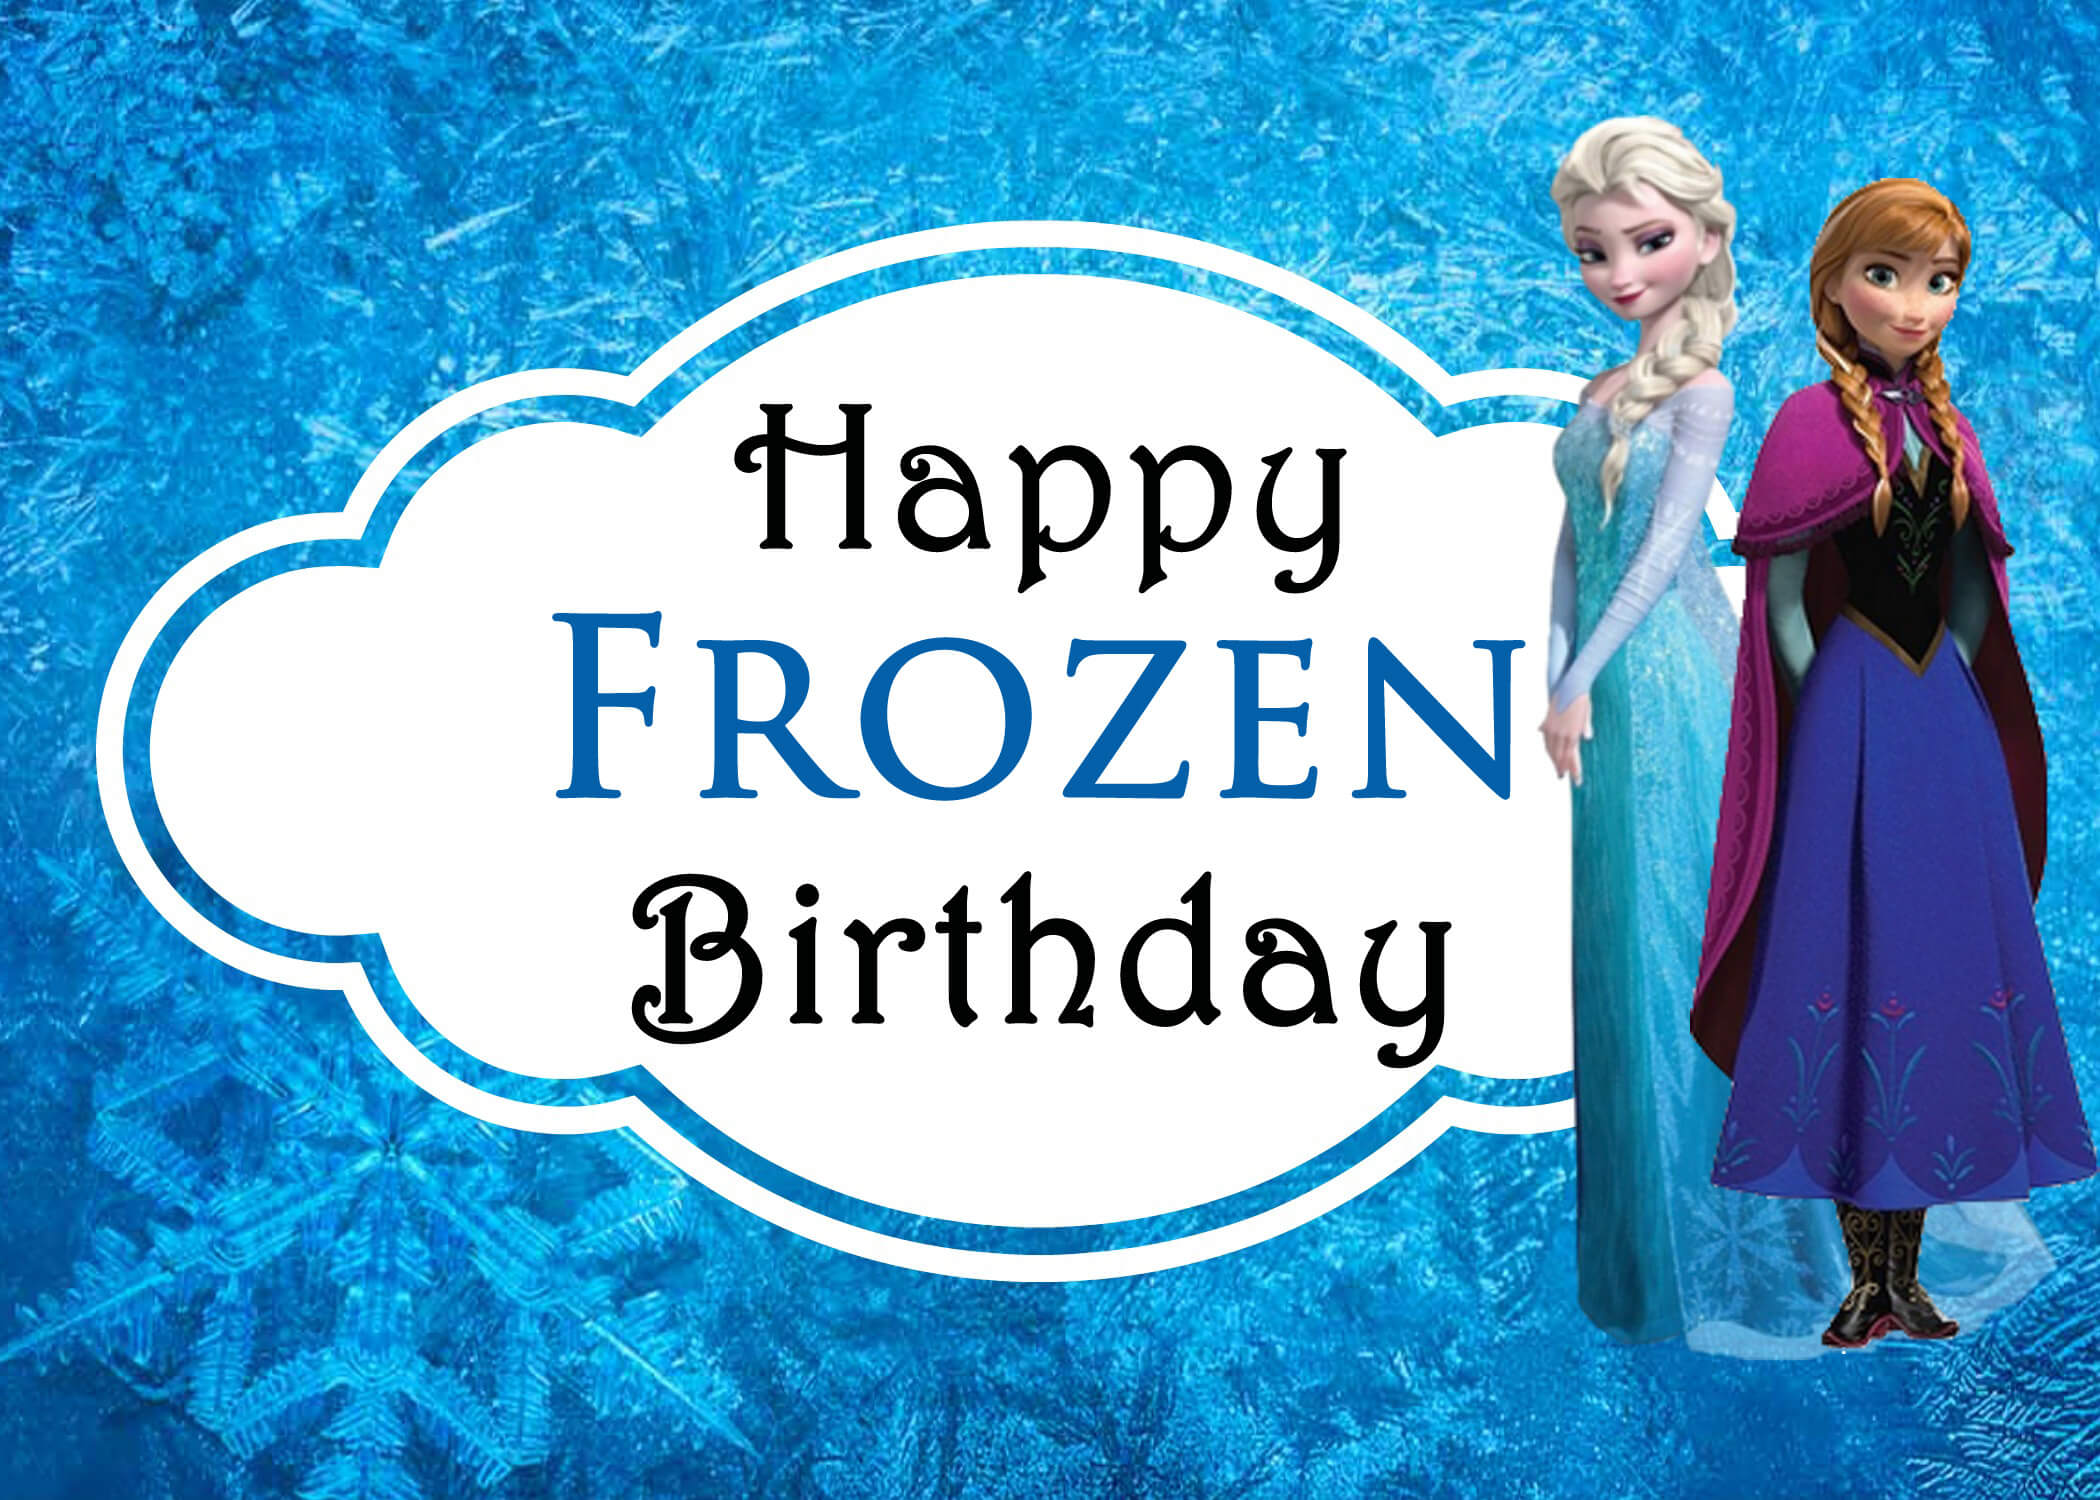 Celebrating Sisters With Disney's Frozen + Free Printable Within Frozen Birthday Card Template